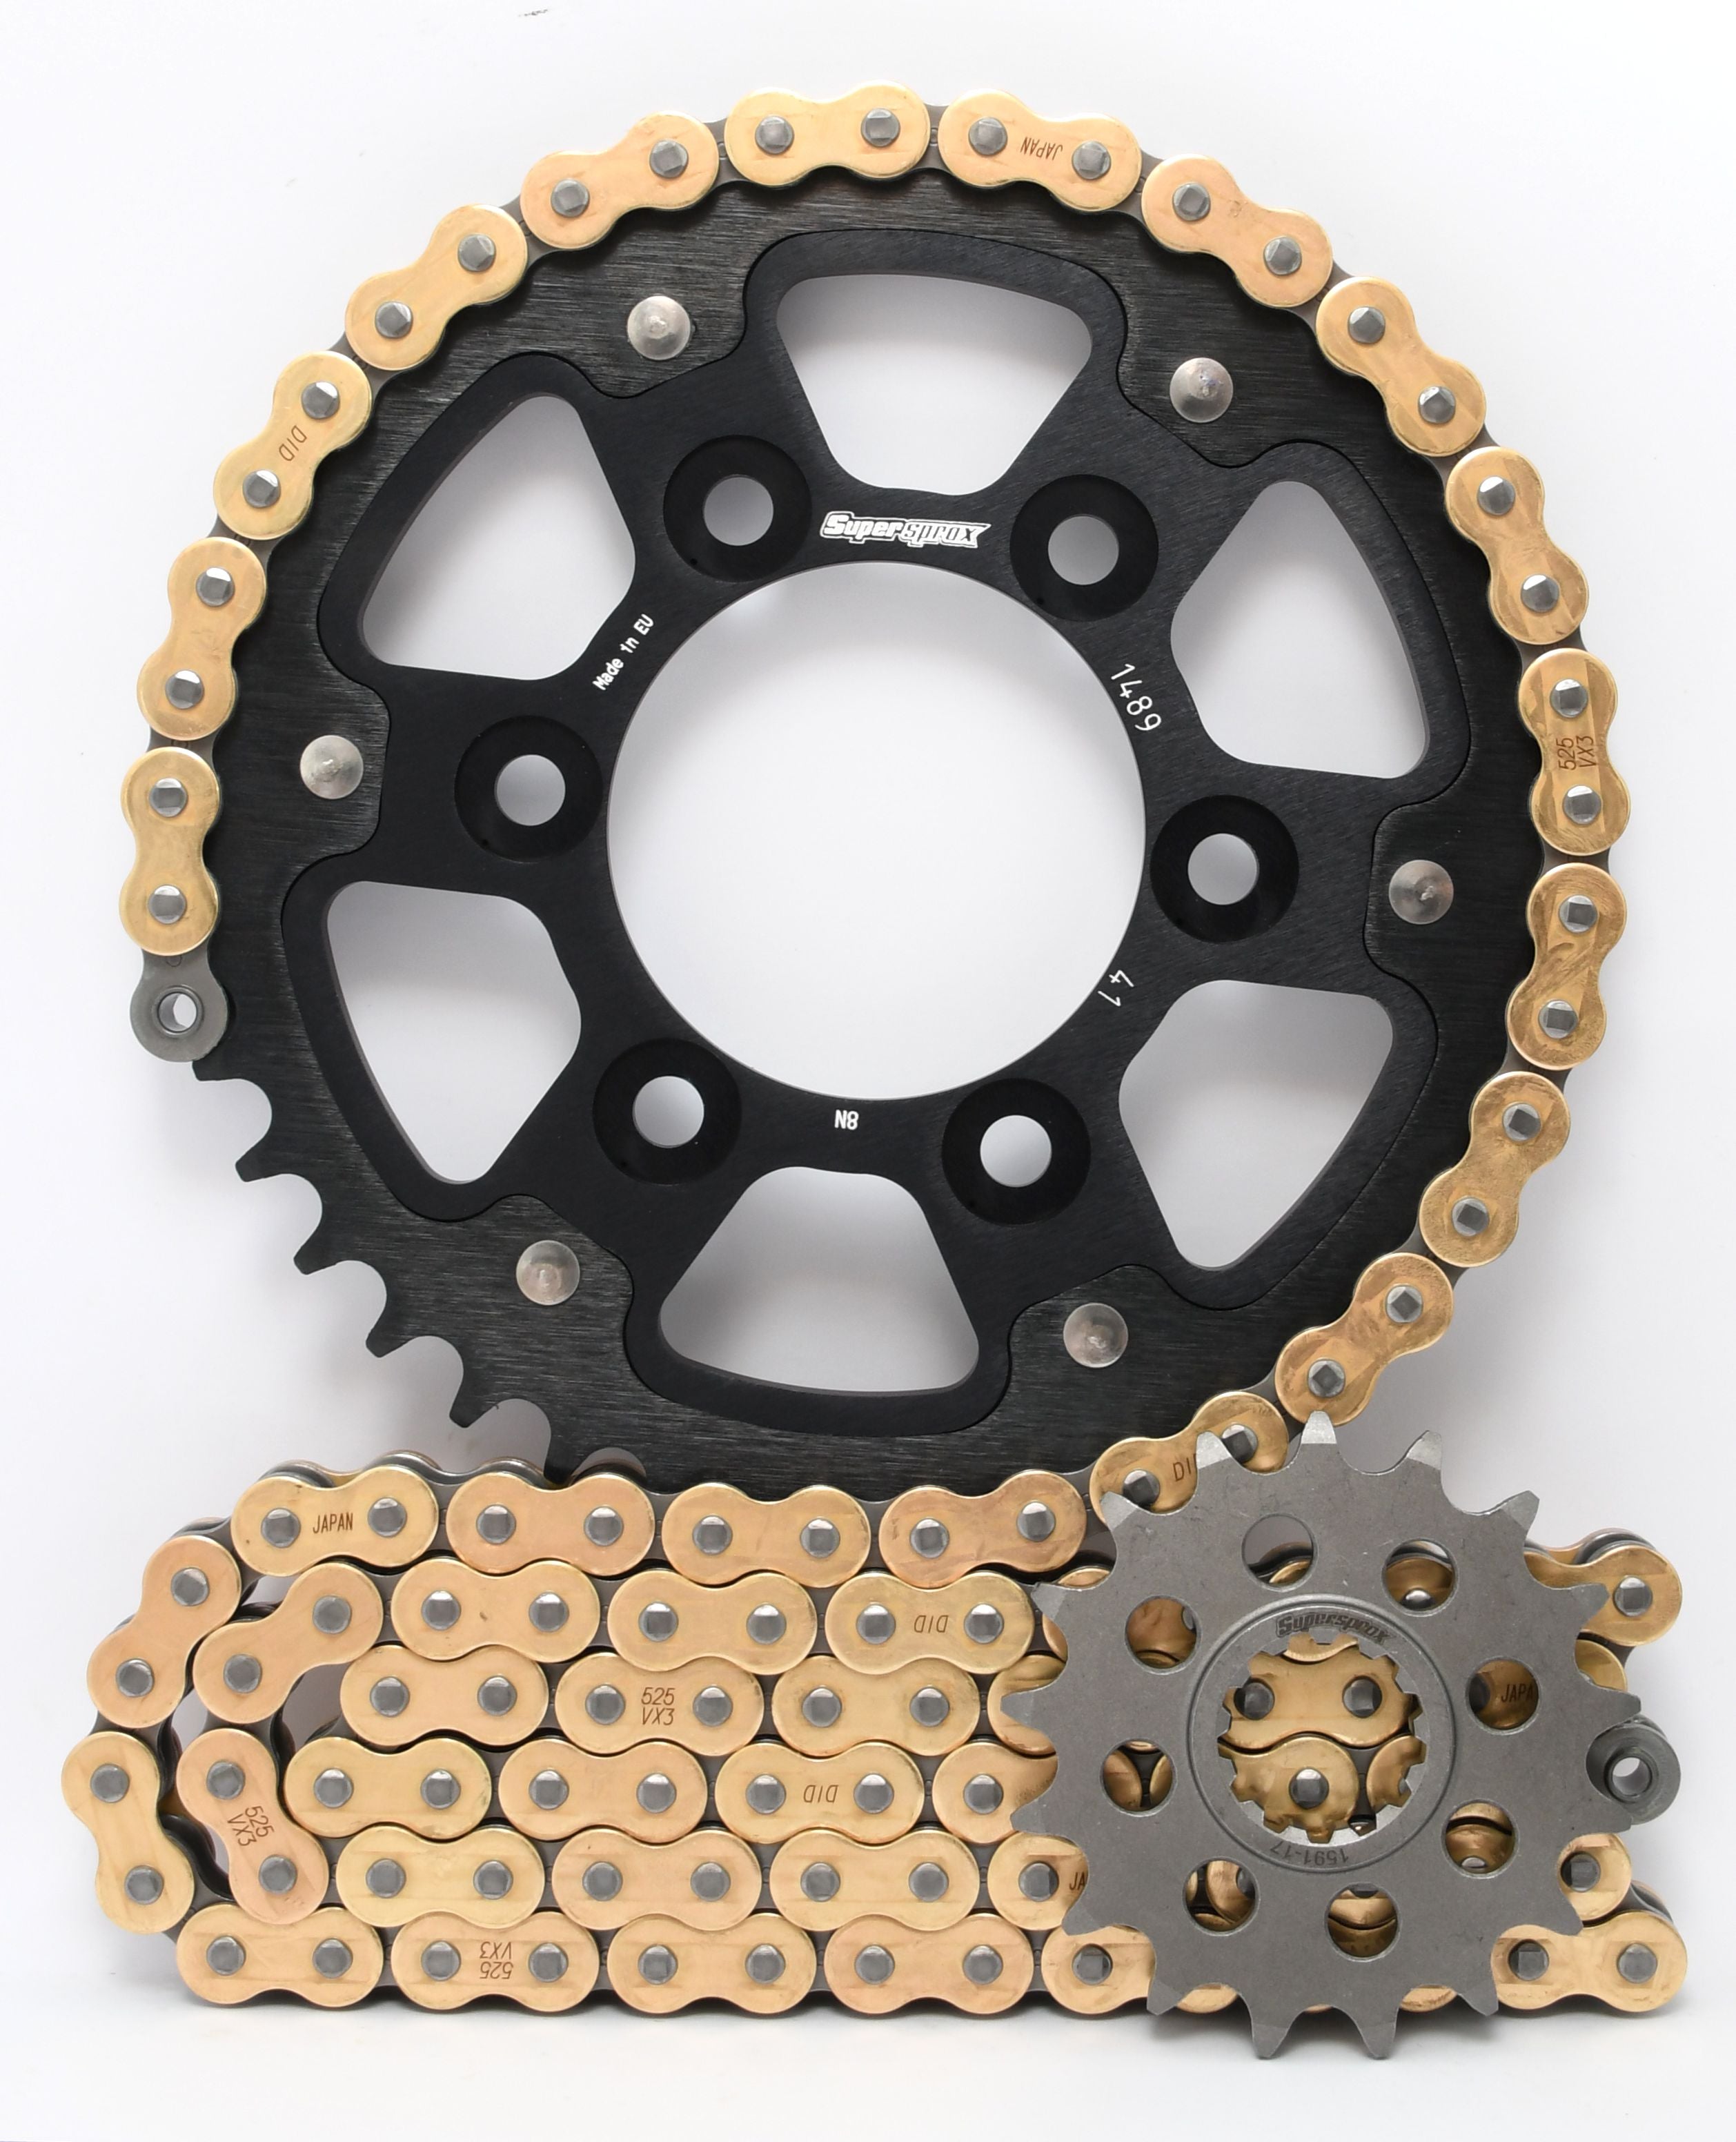 Supersprox Stealth Chain & Sprocket Kit for Kawasaki ZX10R 06-07 - Standard Gearing